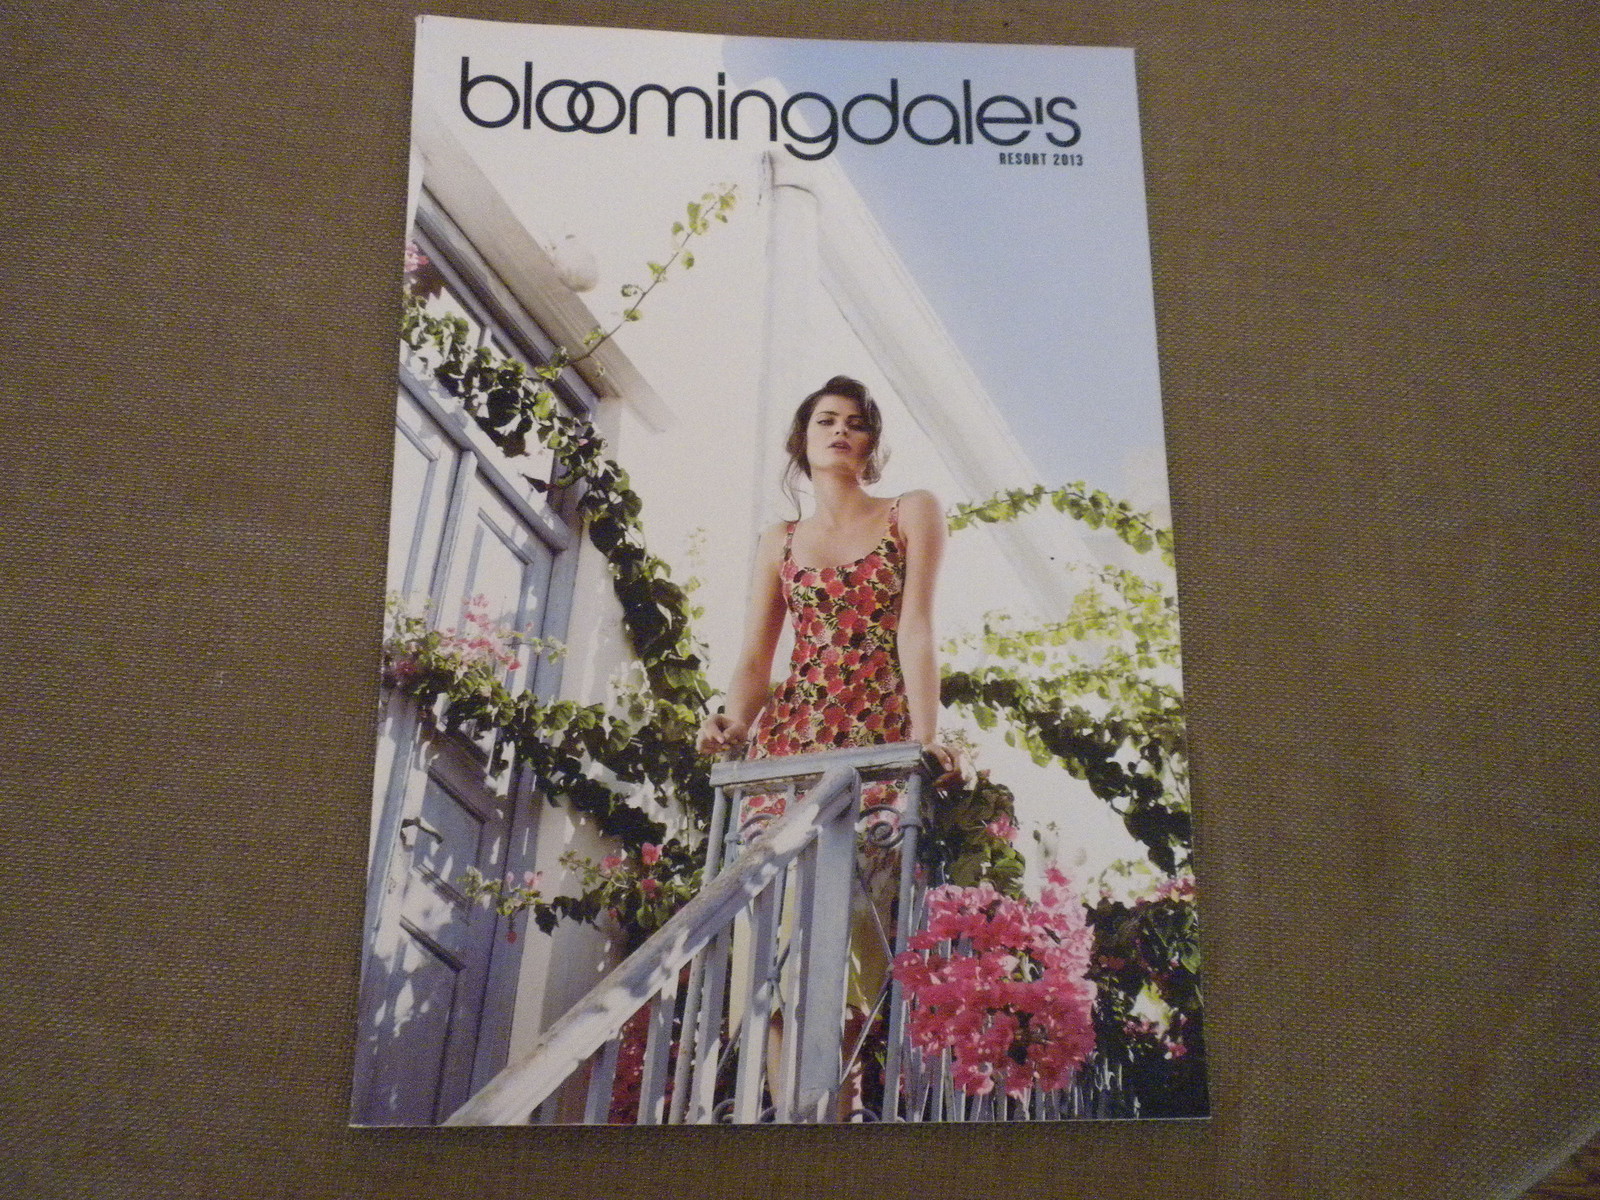 Primary image for Bloomingdales New York Womens Resort  Fashion & Accessories catalog 2013 NF